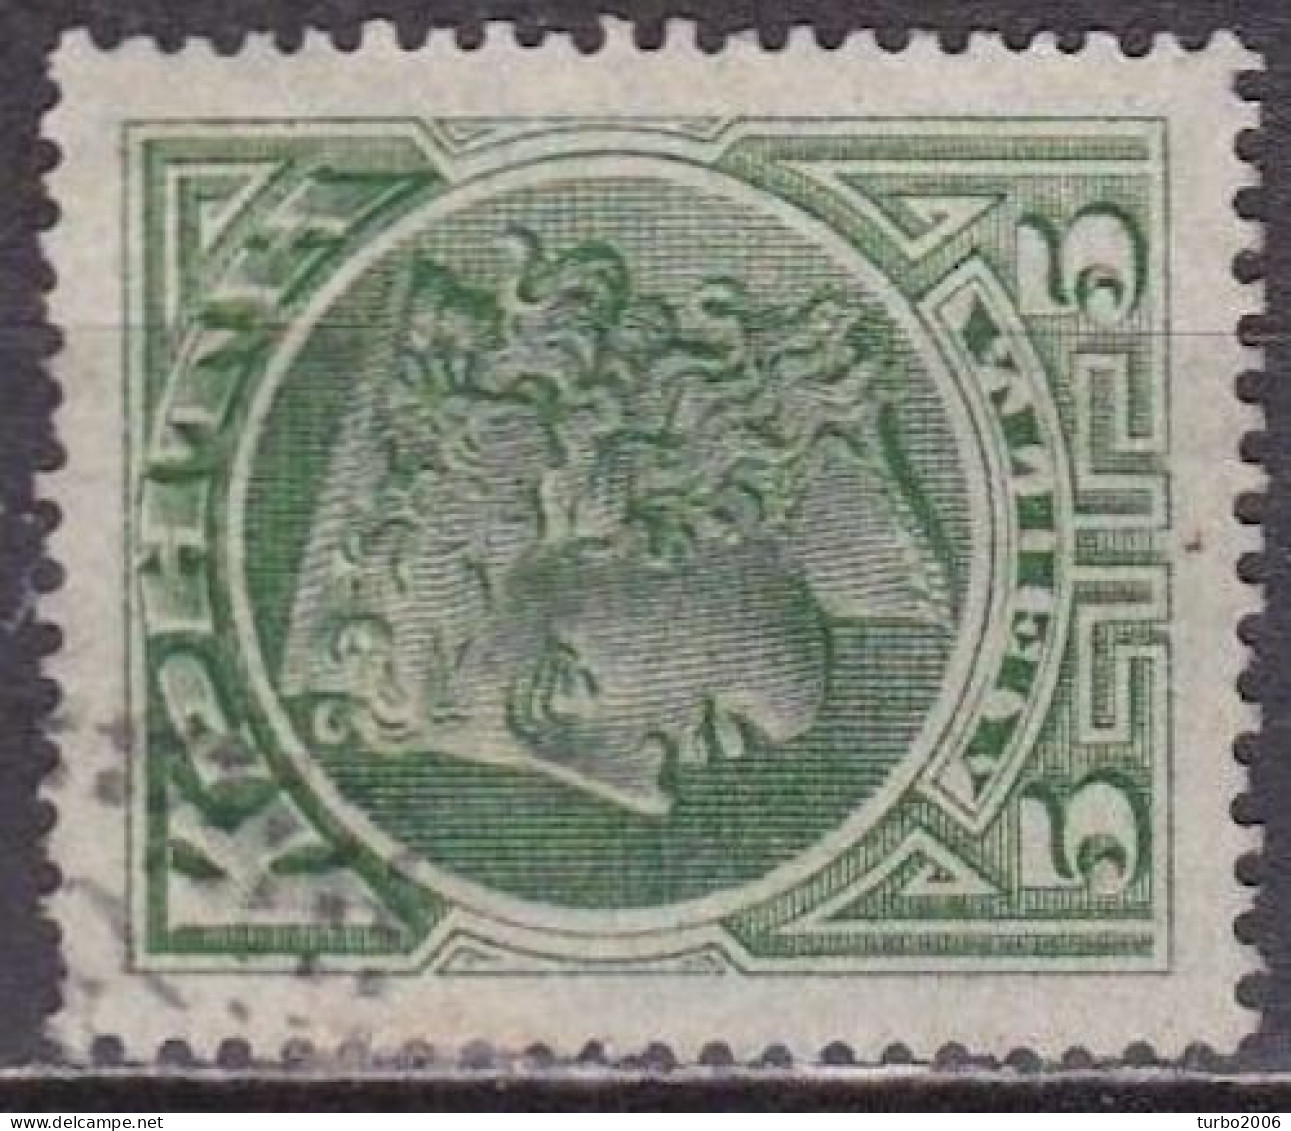 CRETE 1900 1st Issue Of The Cretan State 5 L. Green Vl. 2 With Dotted Rural Cancellation 8 - Crète